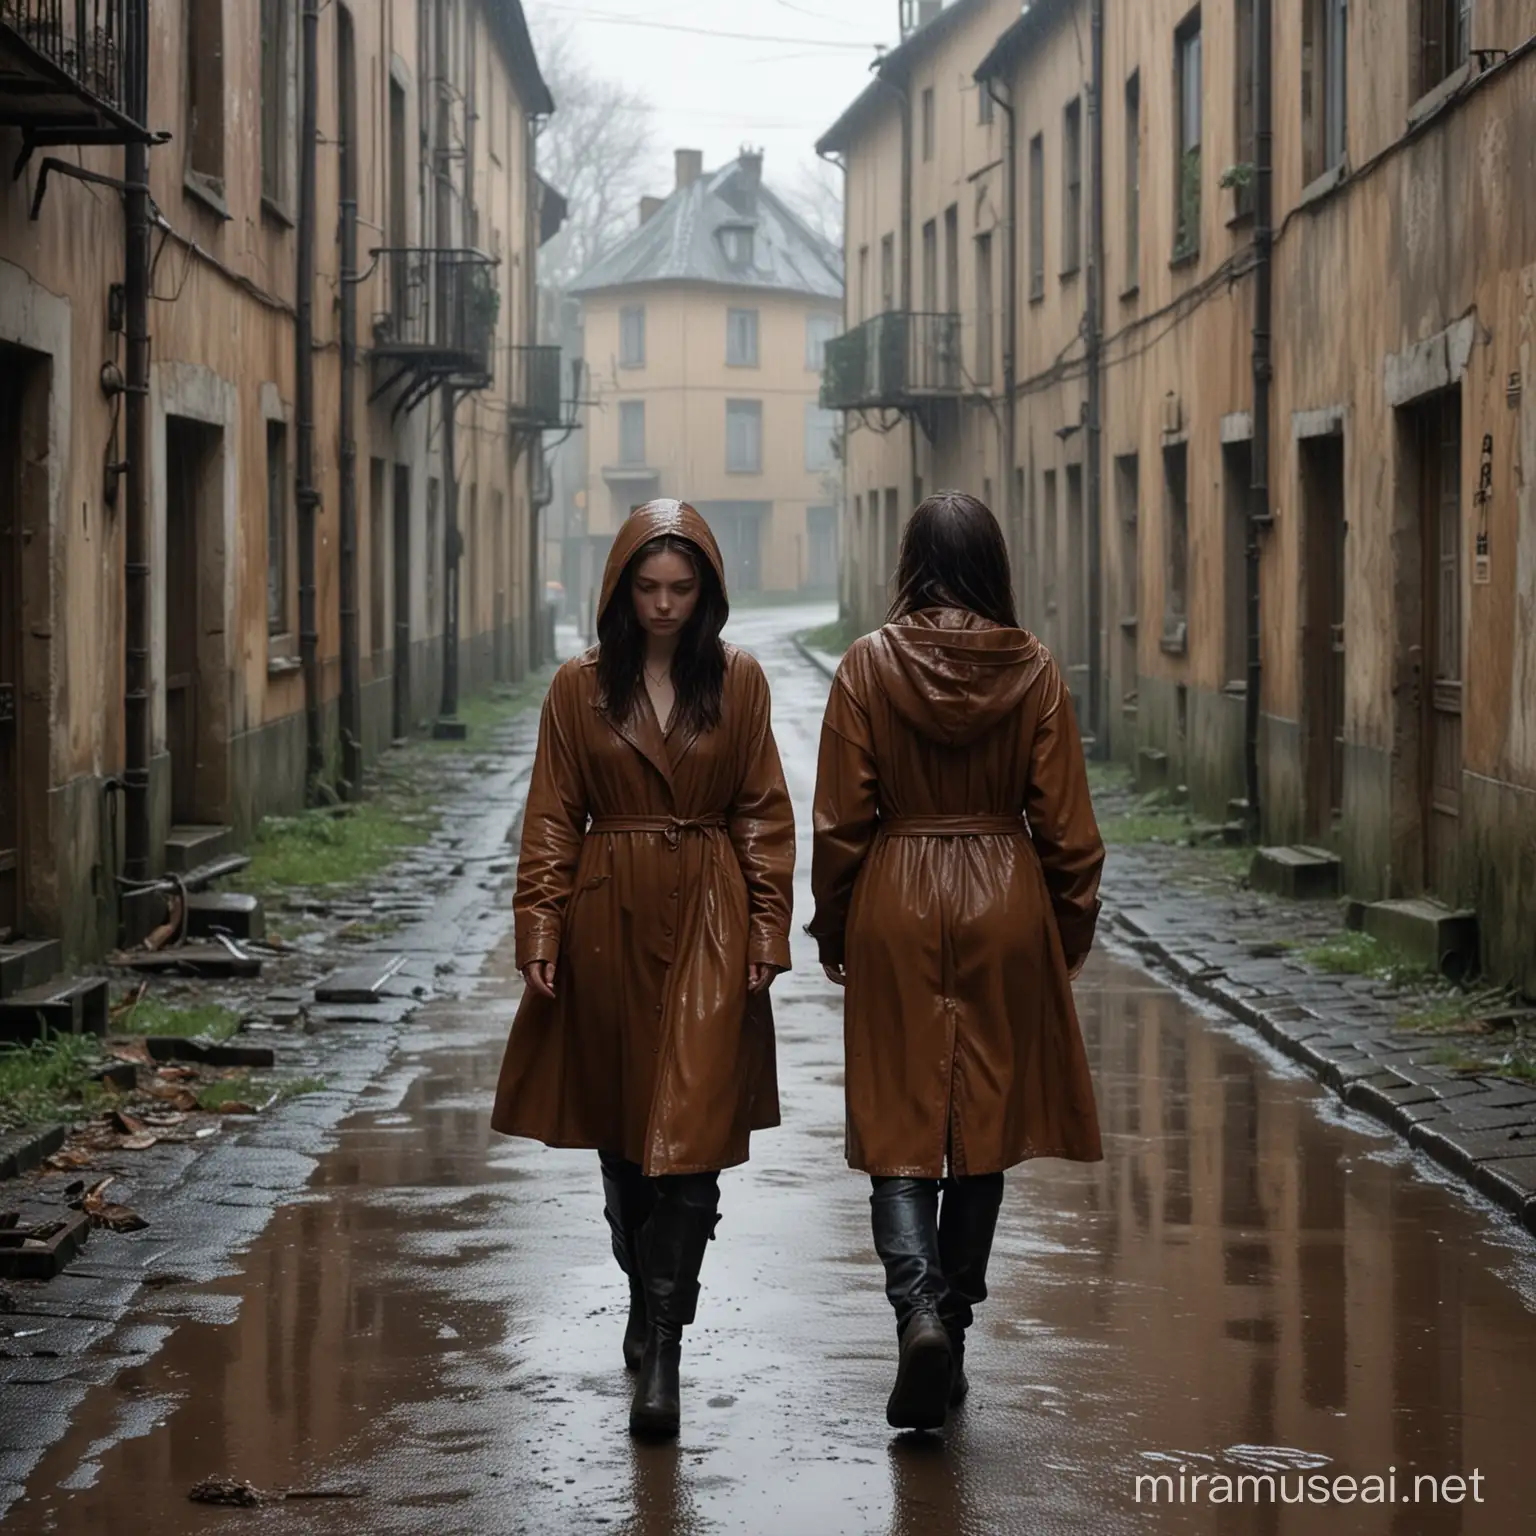 a 20 year old beautiful girl is walking looking down in the rainy street, tarkovsky scene, beautiful and creepy vibes, she is wearing a mysterious brown outfit, her head is covered, the background features a abandoned place. 